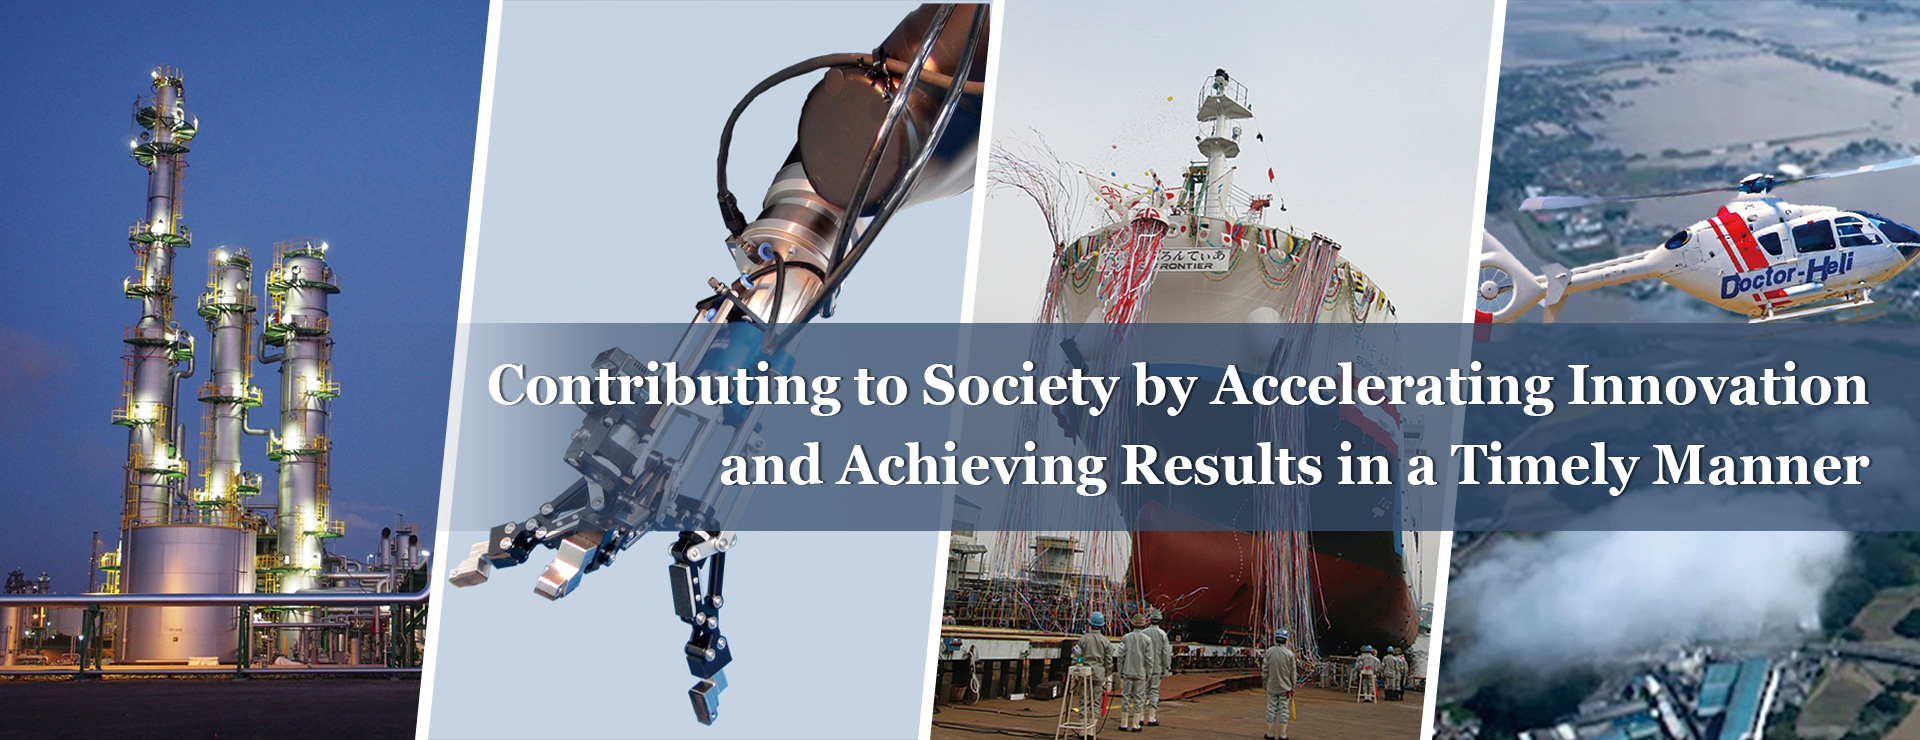 Contributing to Society by Accelerating Innovation and Achieving Results in a Timely Manner